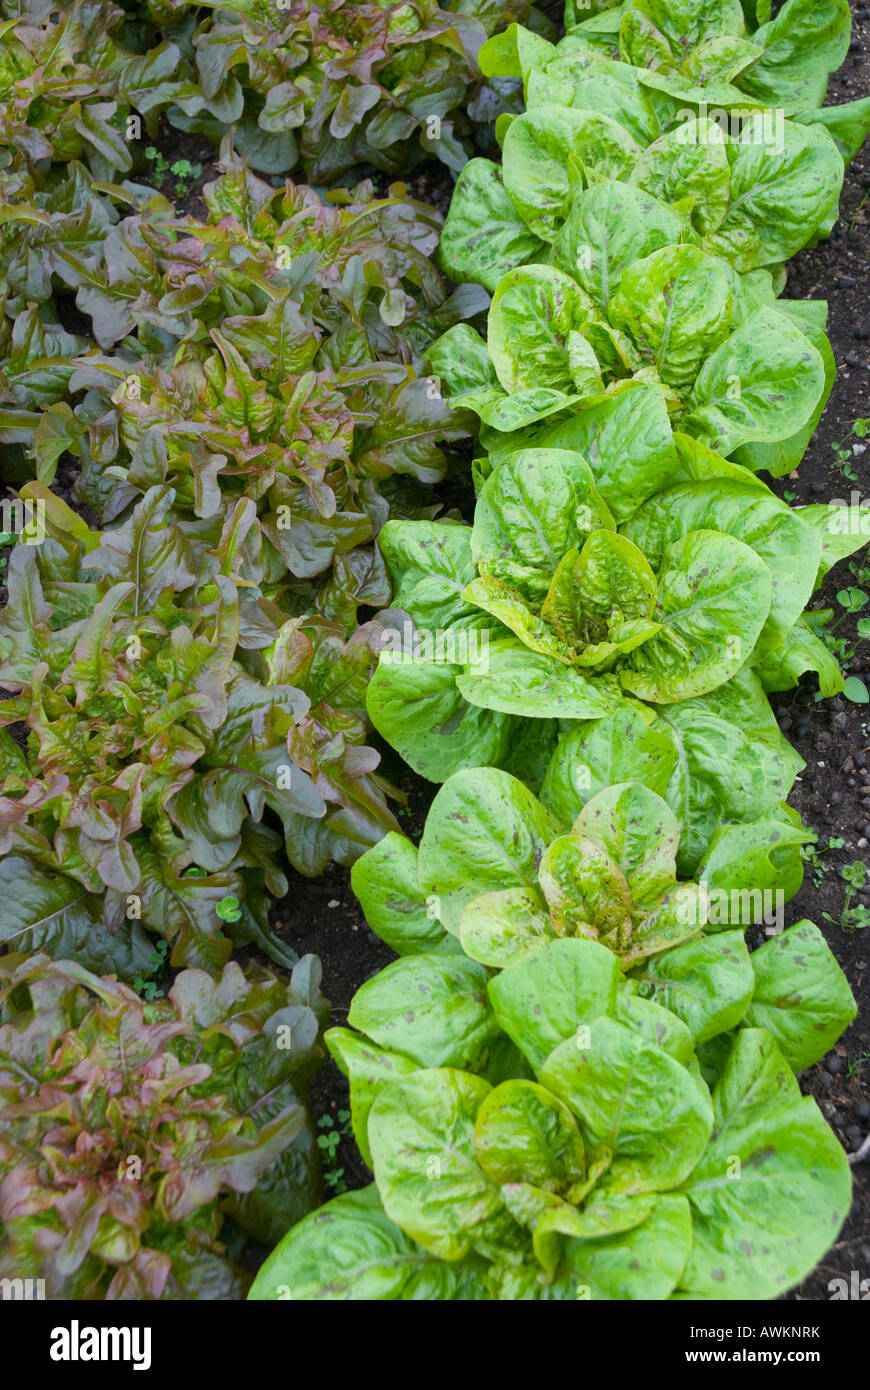 Two varieties of lettuce Stock Photo